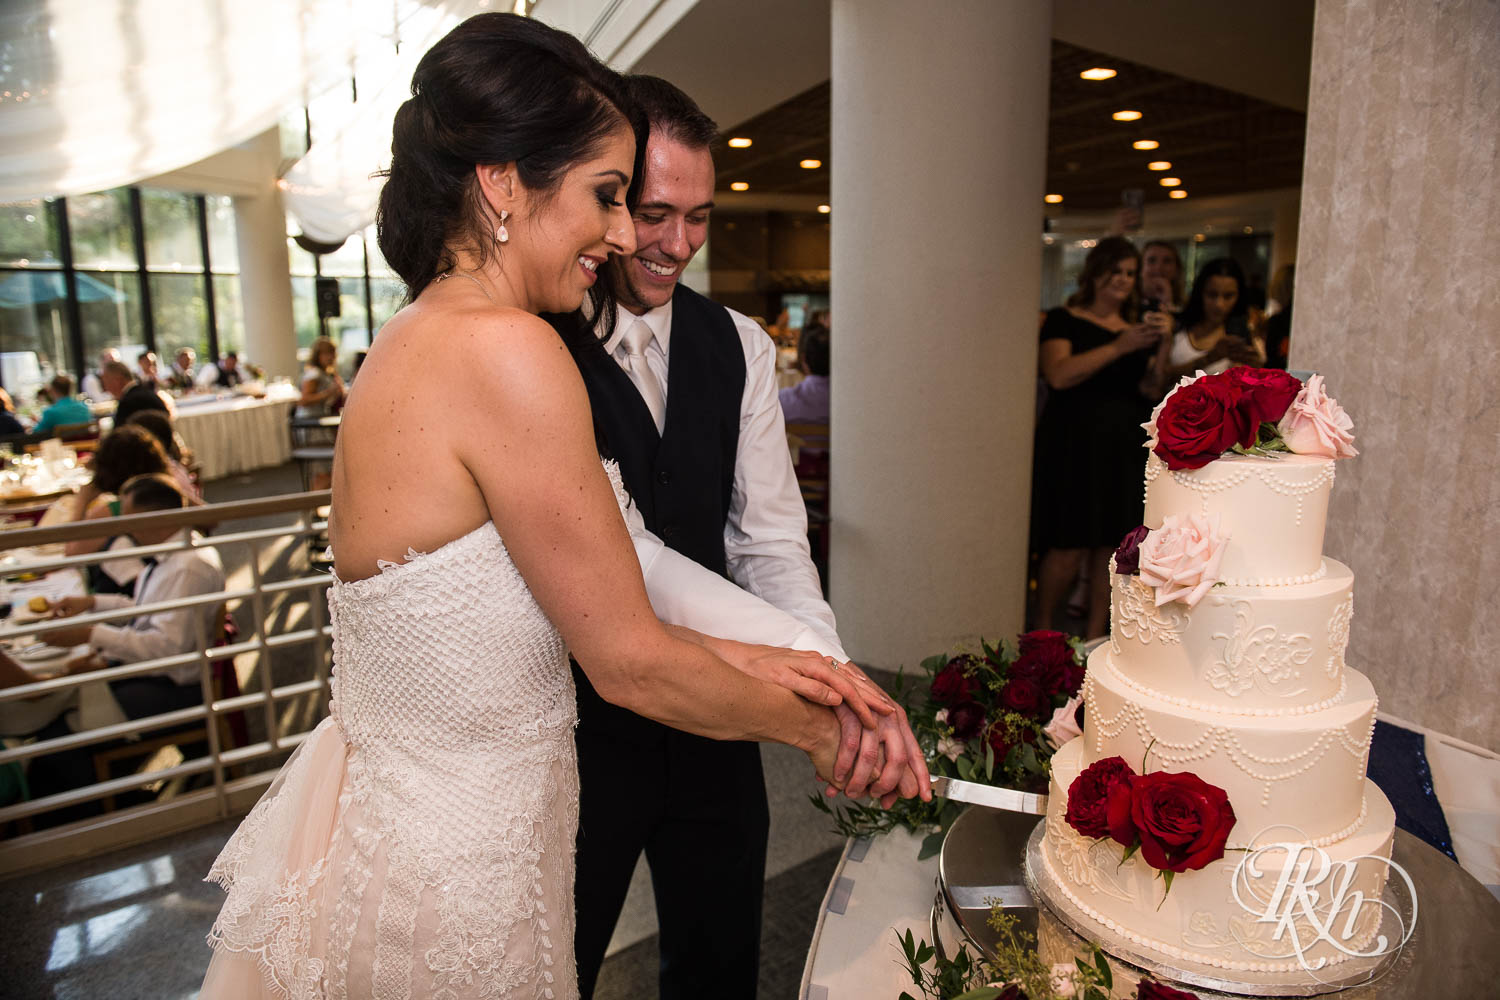 Bride and groom cut cake during wedding reception in Chaska, Minnesota.